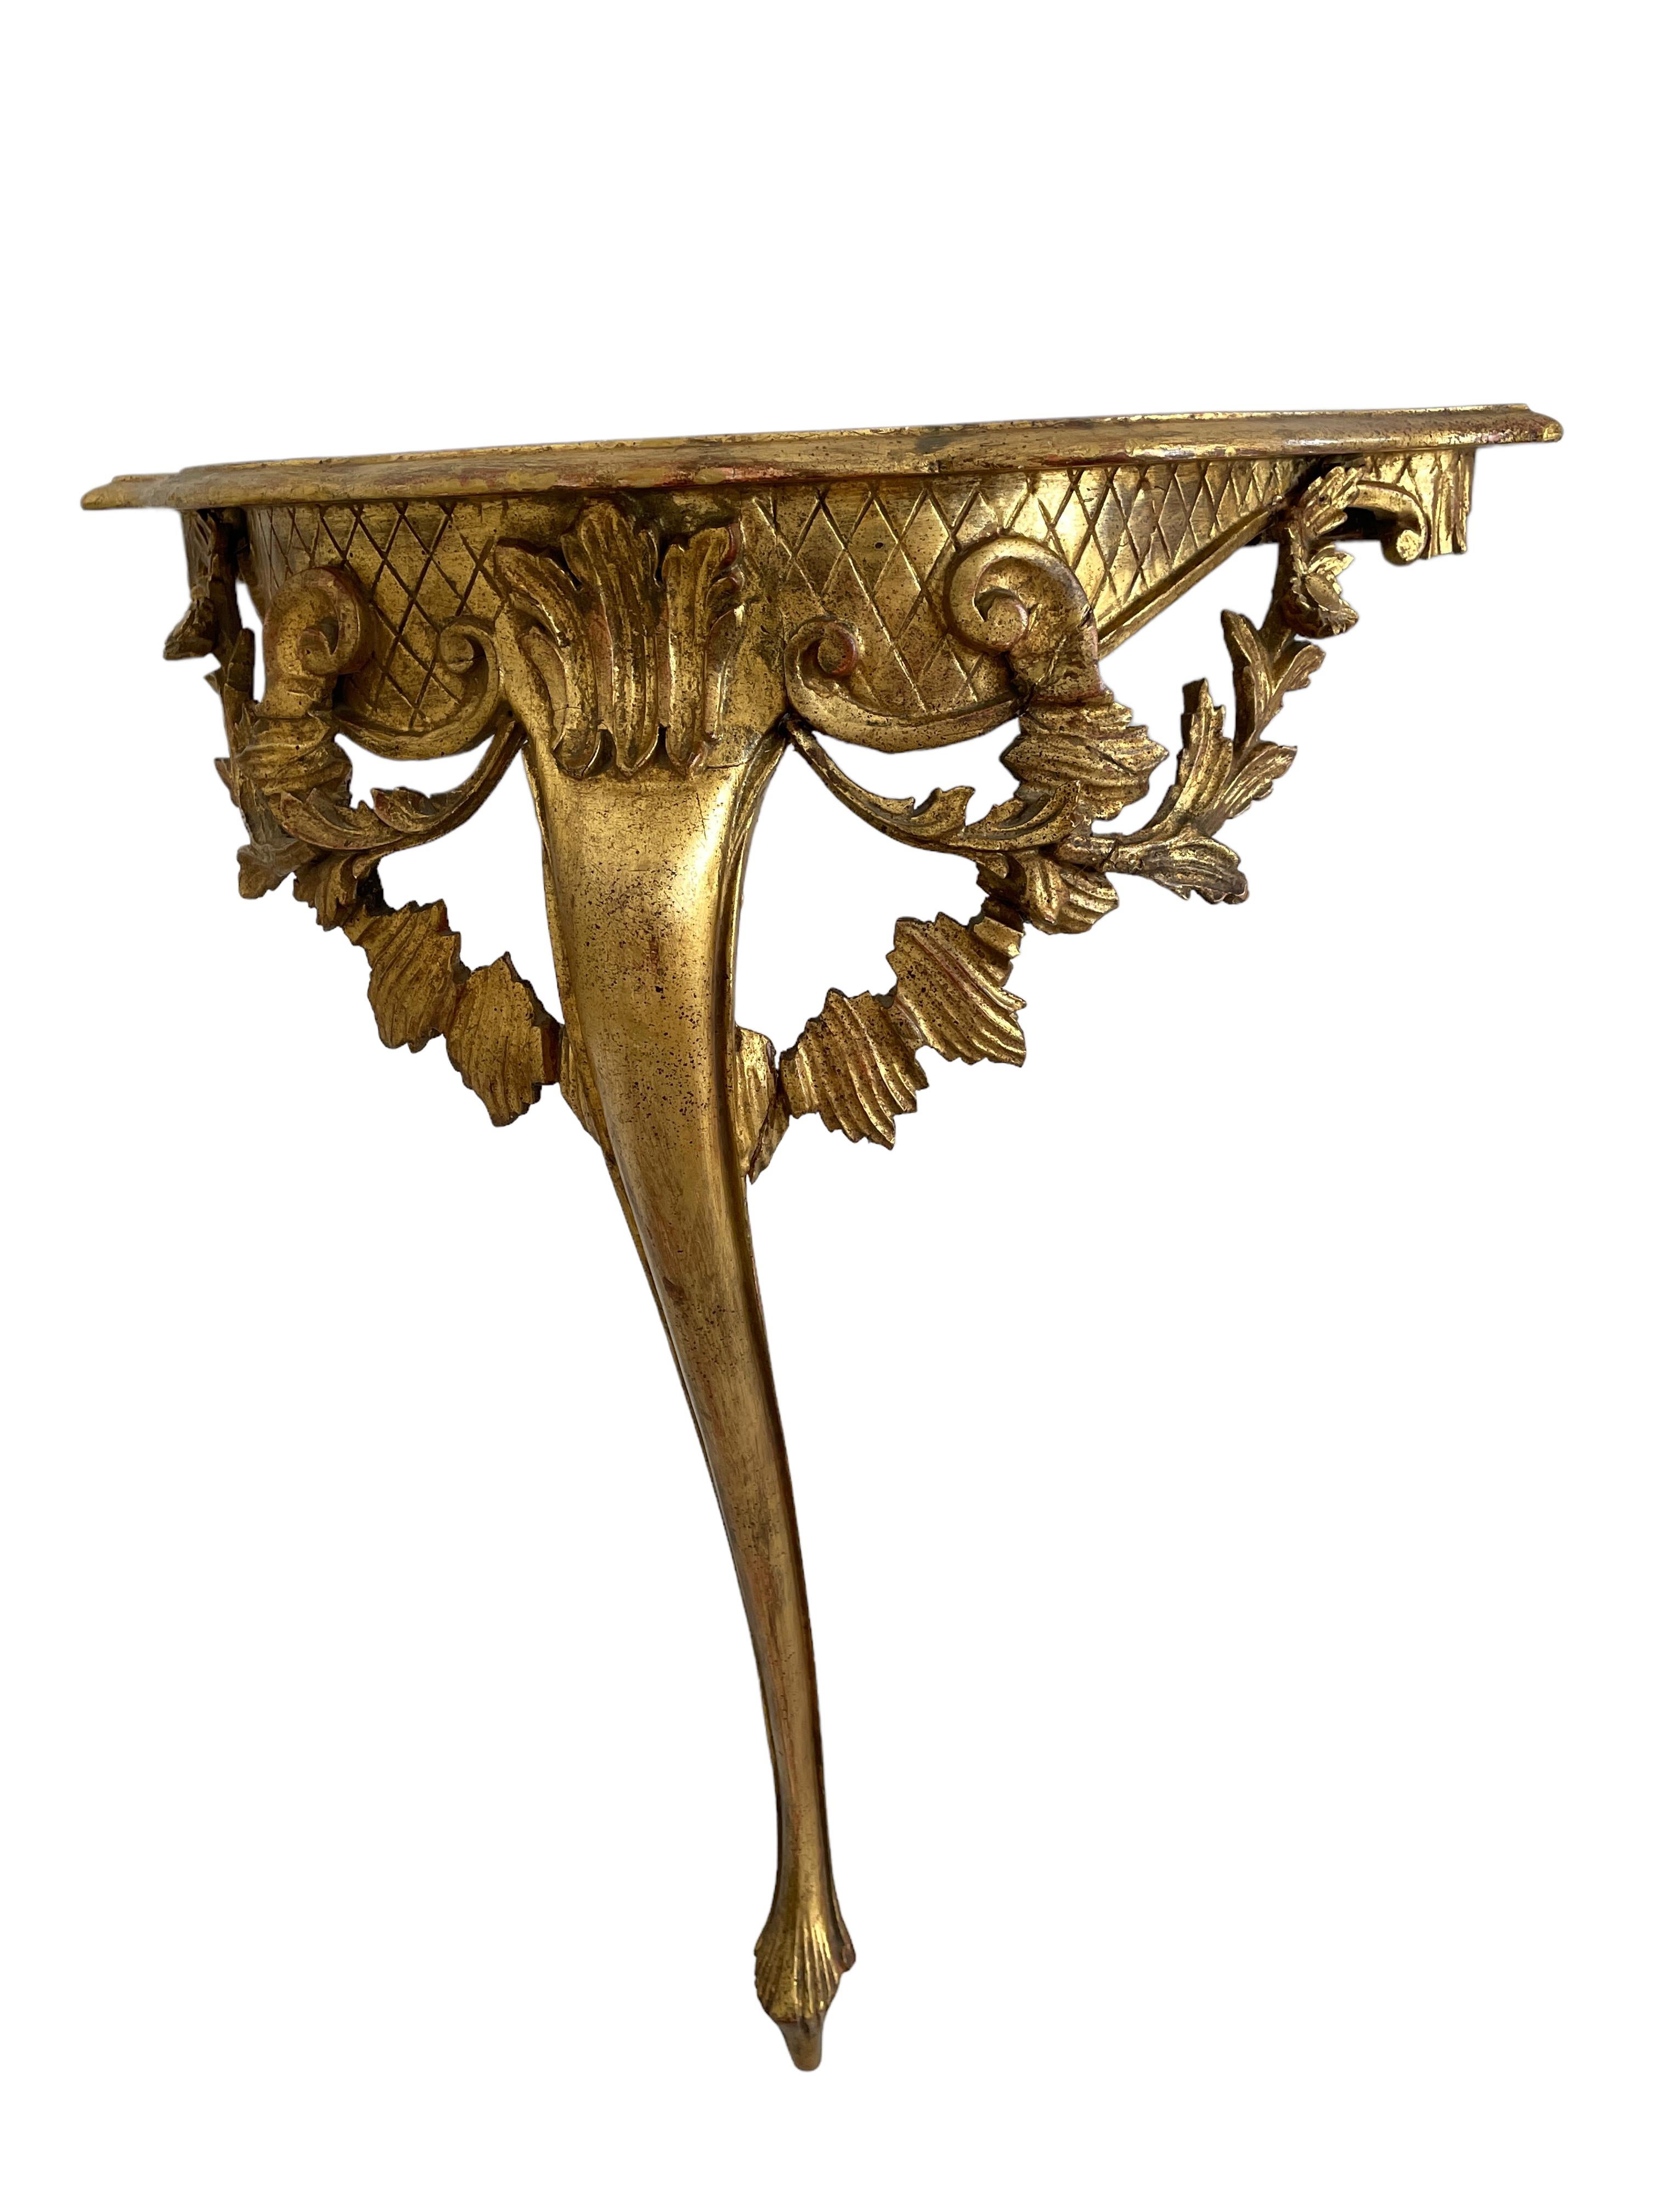 Italian Vintage Hollywood Regency Tole Toleware Wall Console Table, Gilded Carved Wood